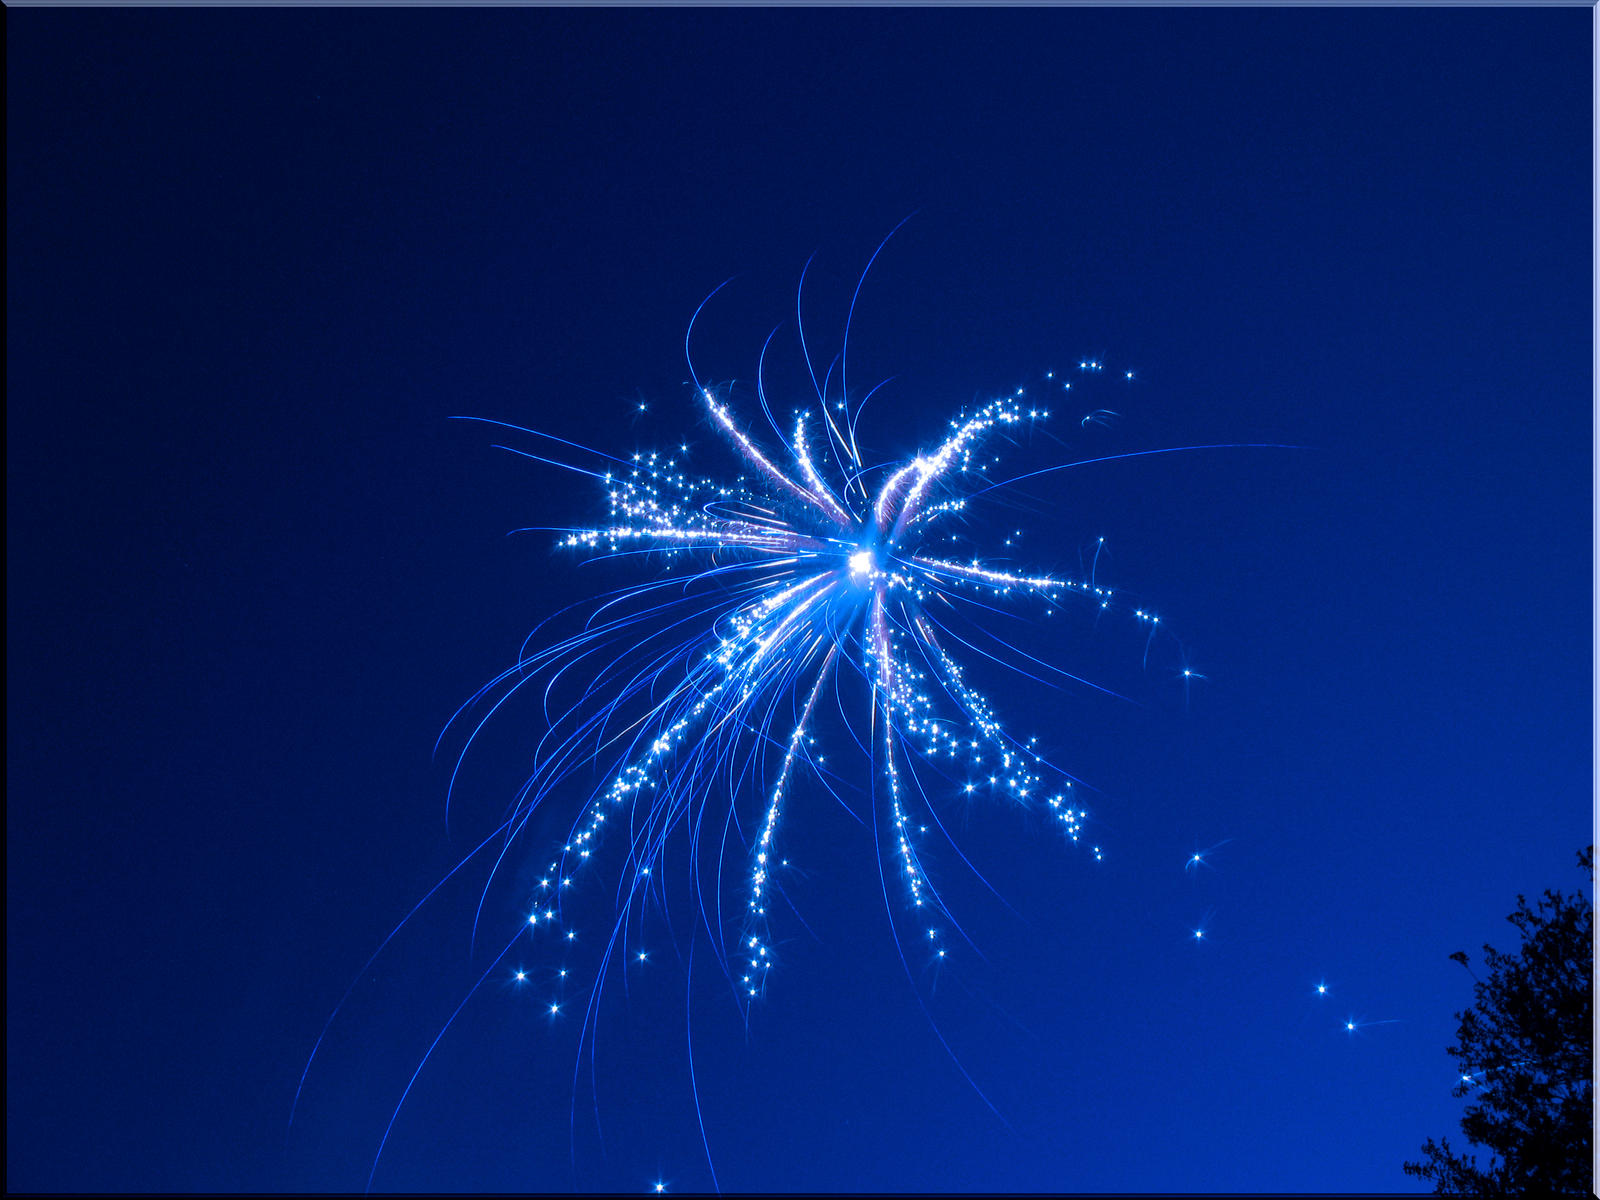 blue-firework-contest-entry-2-by-wdwparksgal-stock-on-deviantart